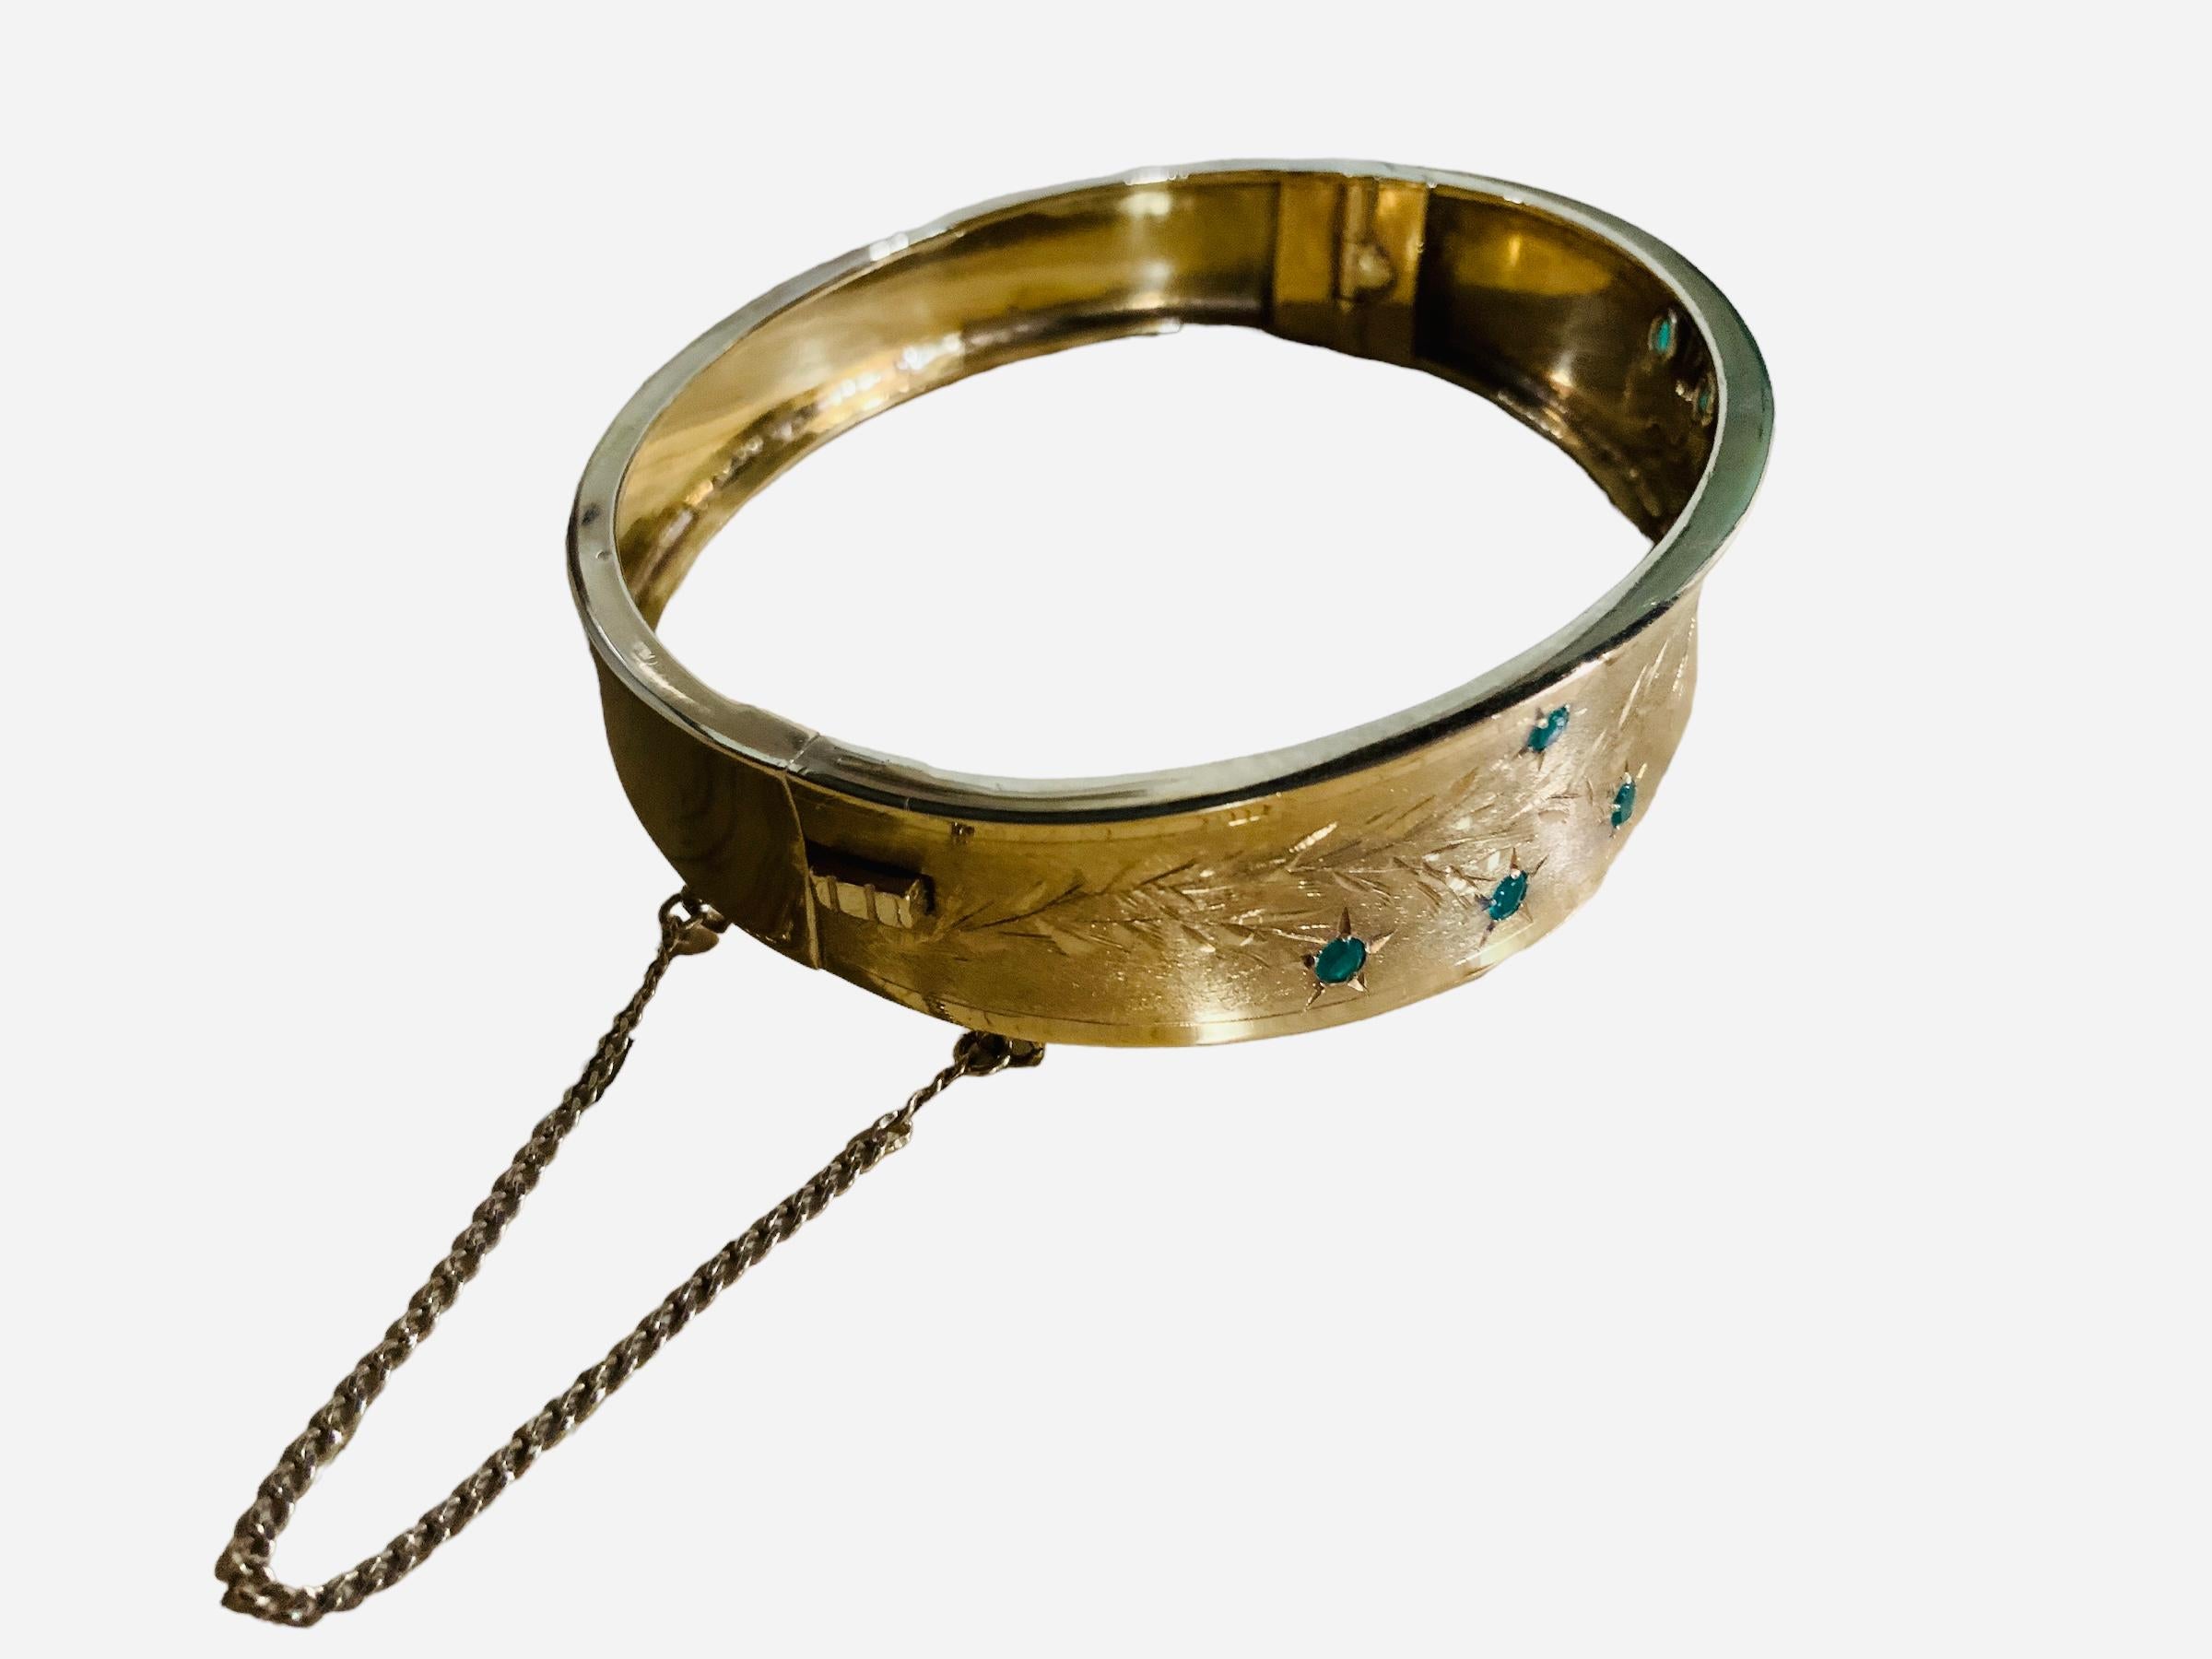 This is an 18K yellow gold and emerald hinged wide bangle. Two long engraved branches adorned with eight pave round cut emeralds of approximately 0.22 ct enhance the bangle. A push button barrel clasp close/open the bangle. It is hallmarked 18K in